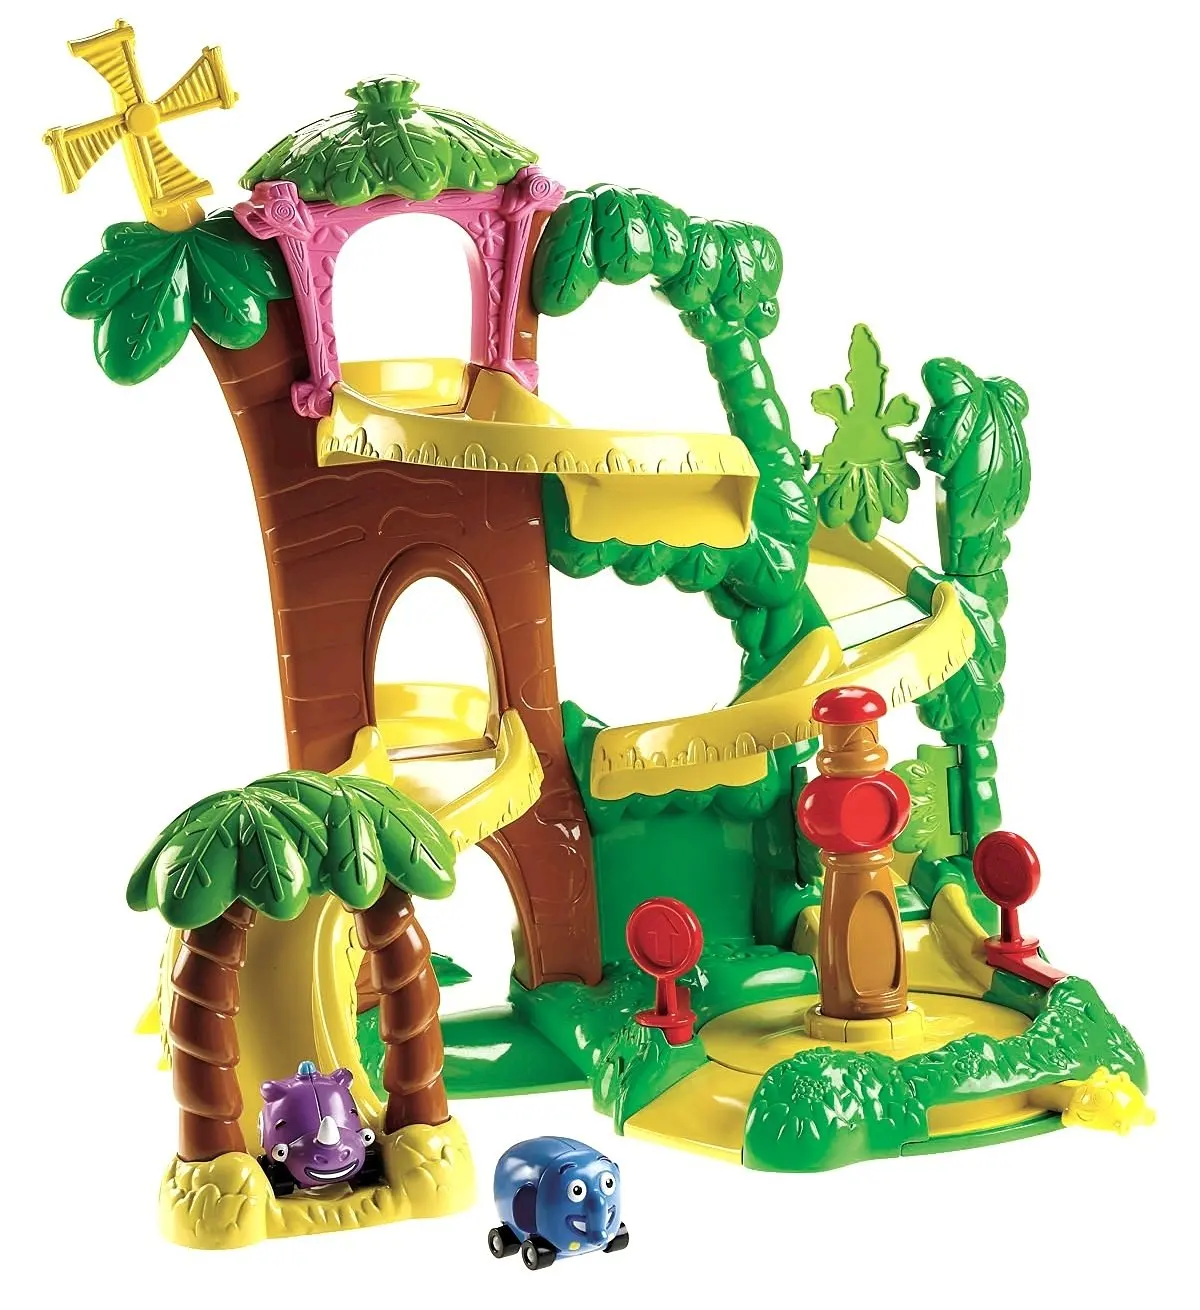 Cheap Jungle Gym Playset Find Jungle Gym Playset Deals On Line At